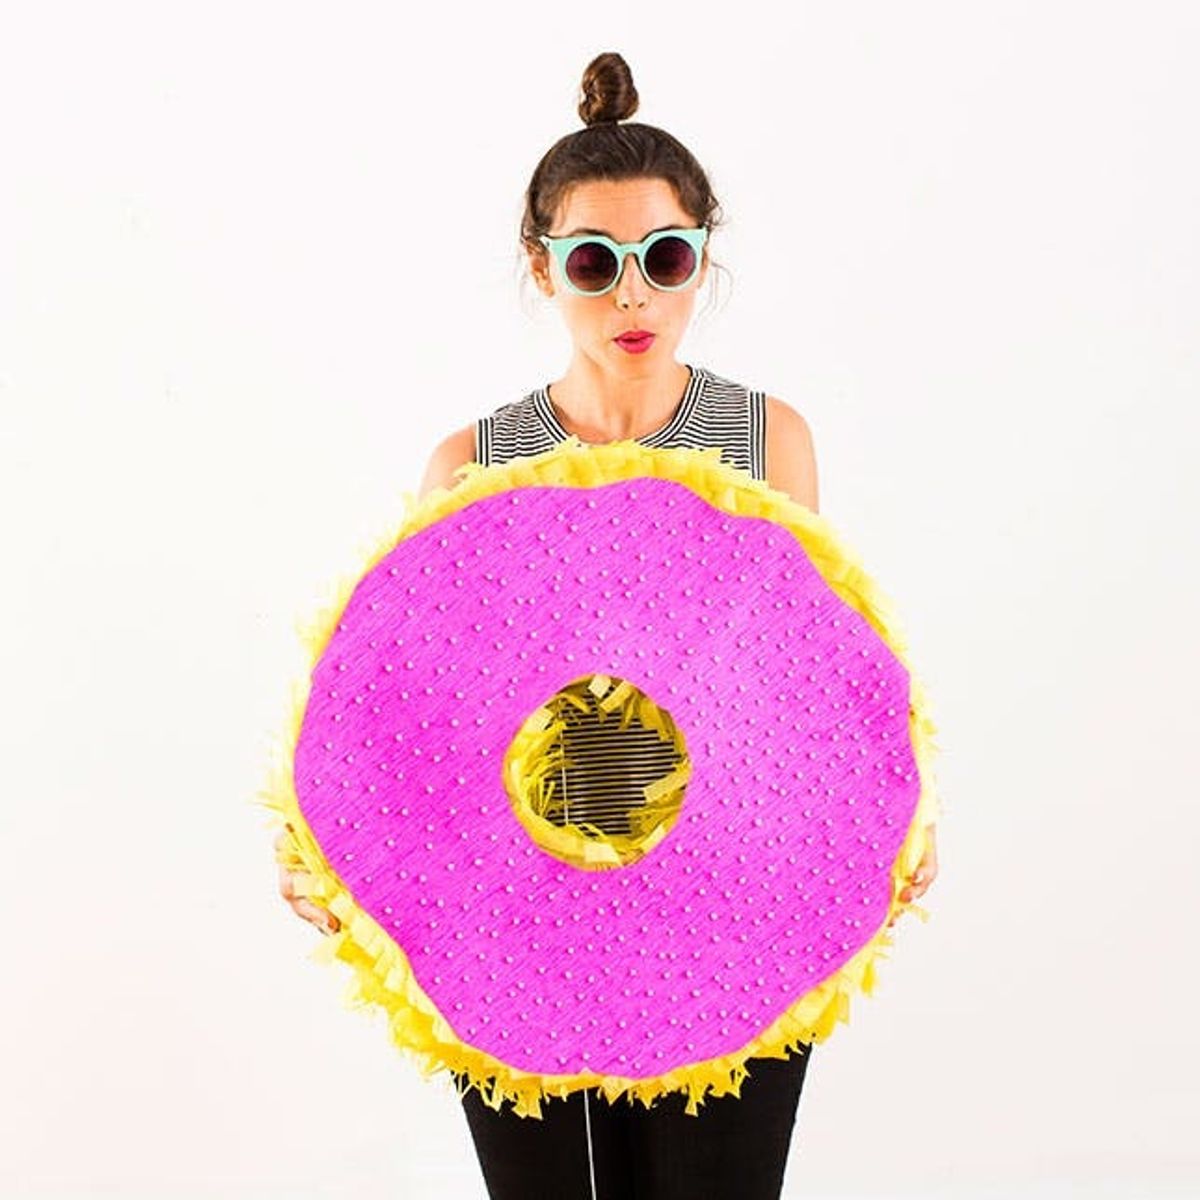 How to Make a Donut Piñata for Your Next Party